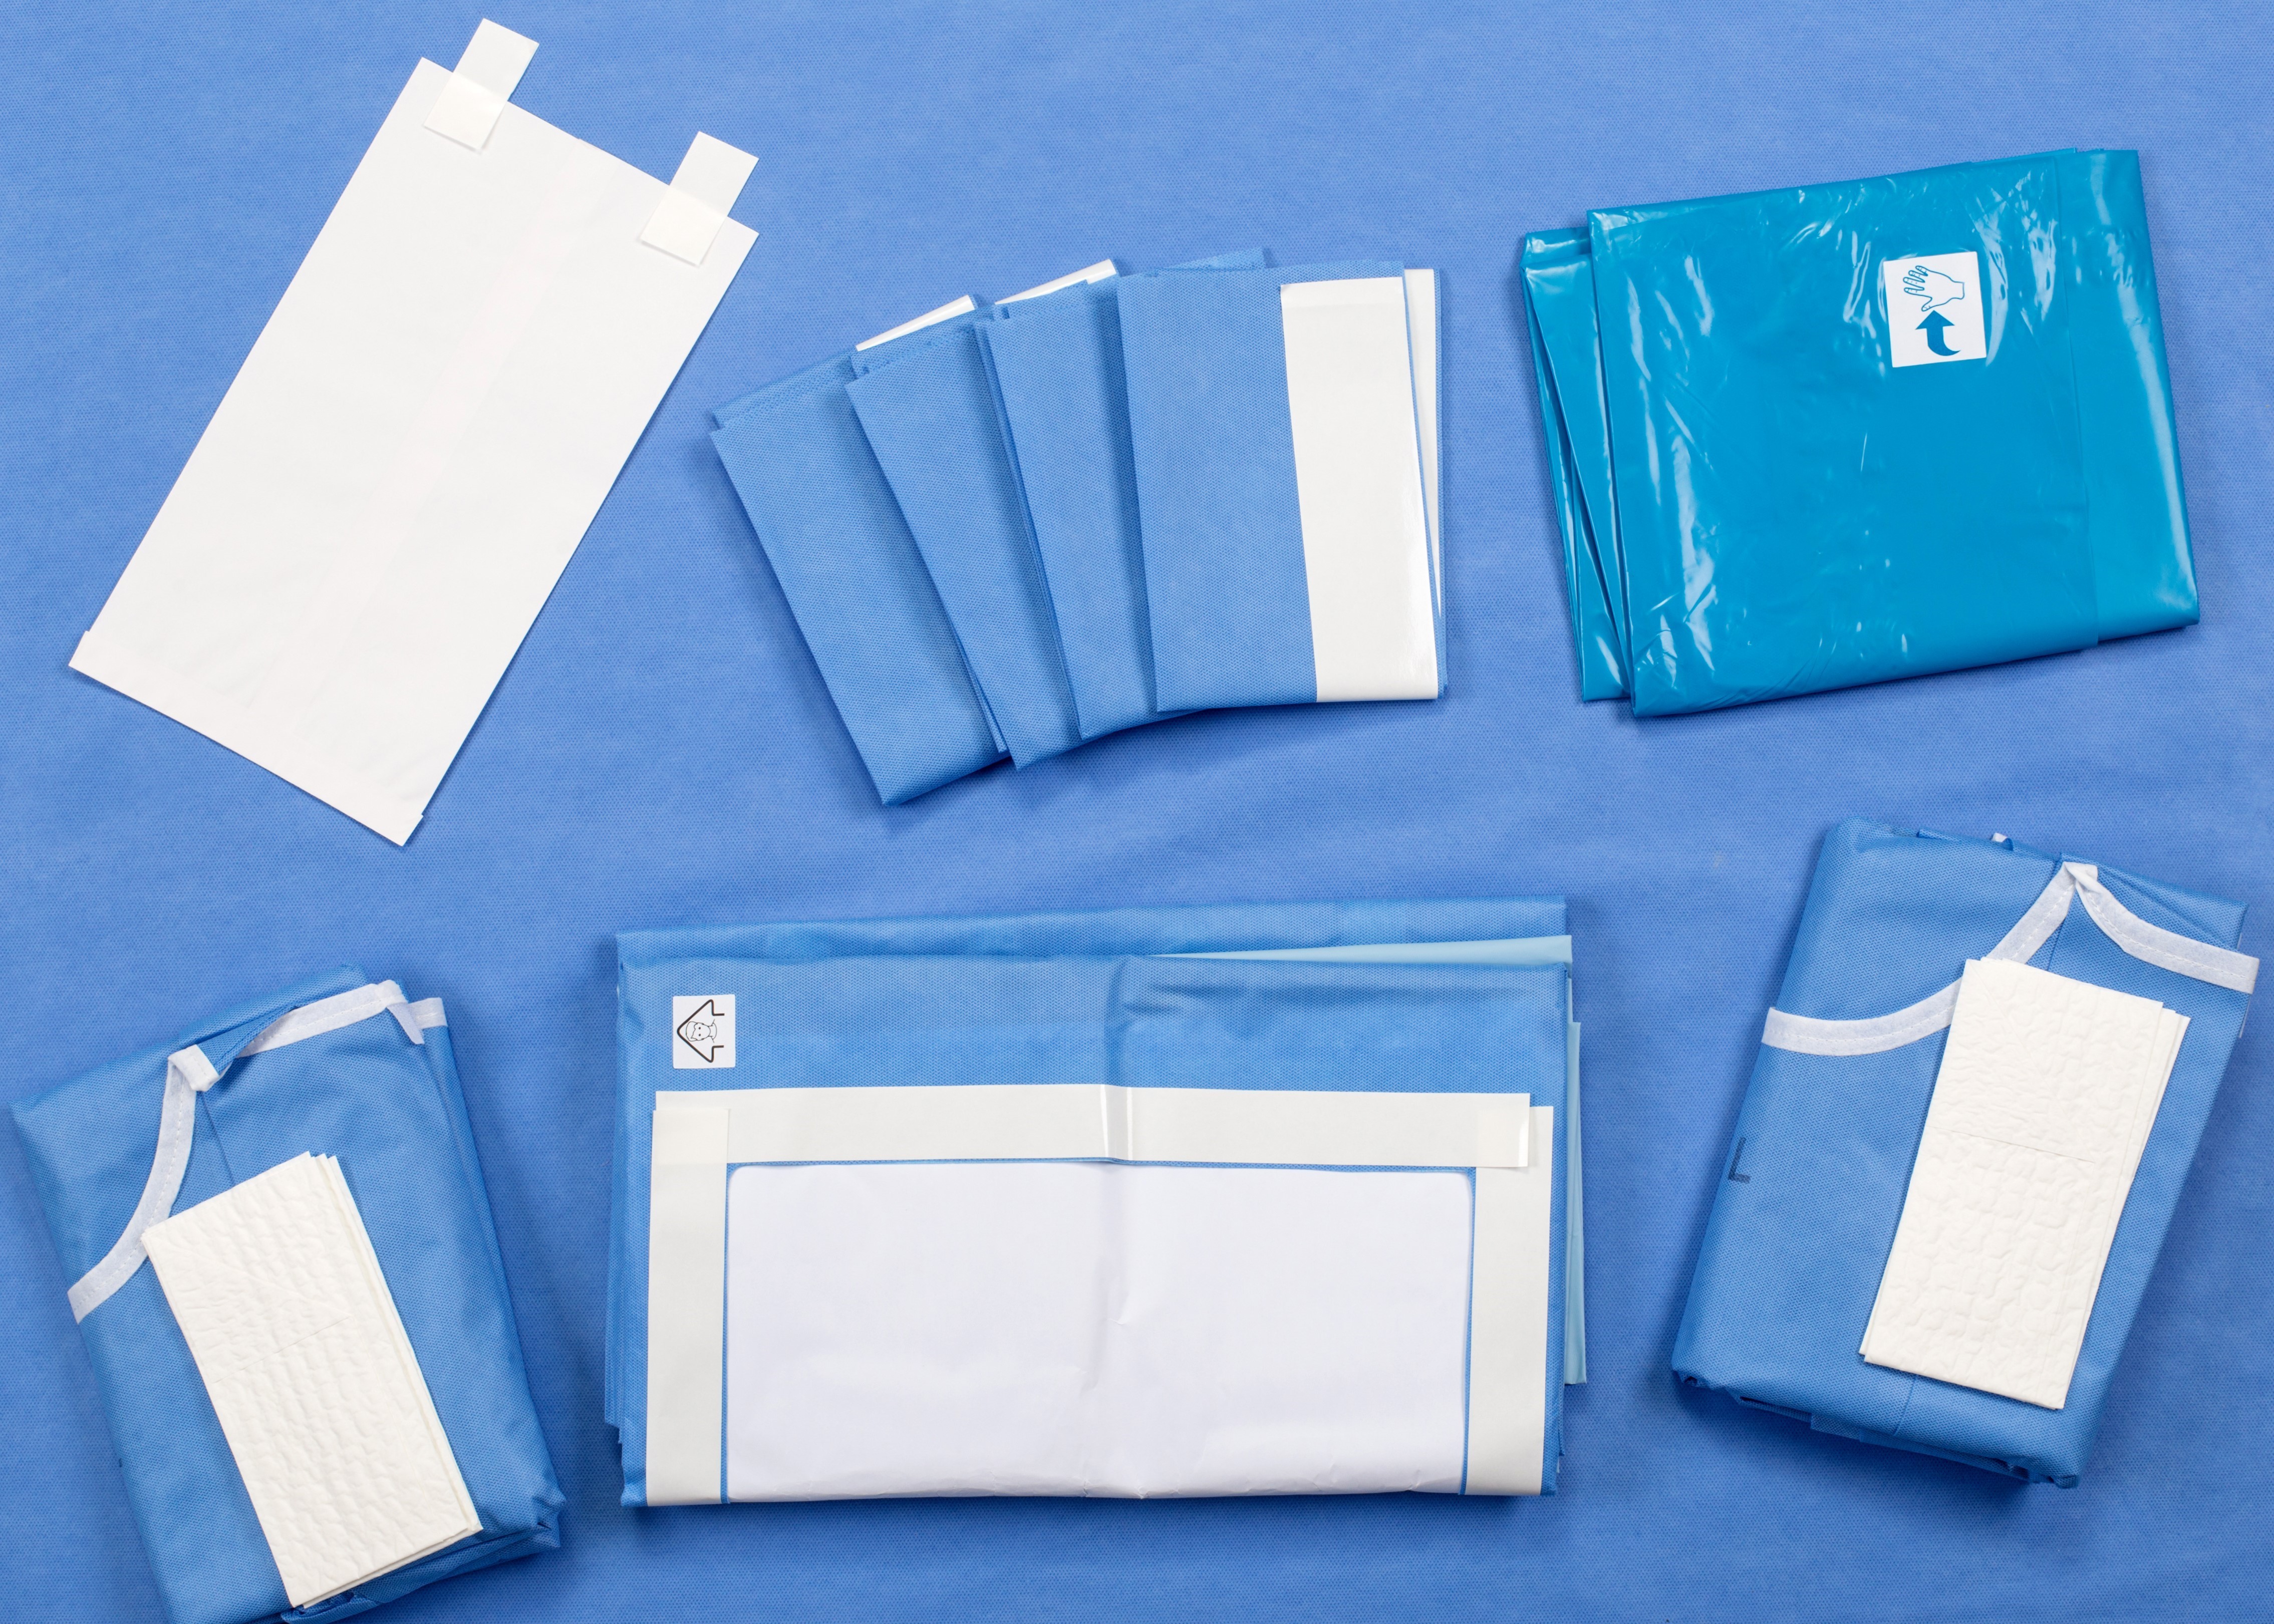  C Section Custom Surgical Packs With Collecting Bag For Caesarean Baby Birth Surgery Manufactures